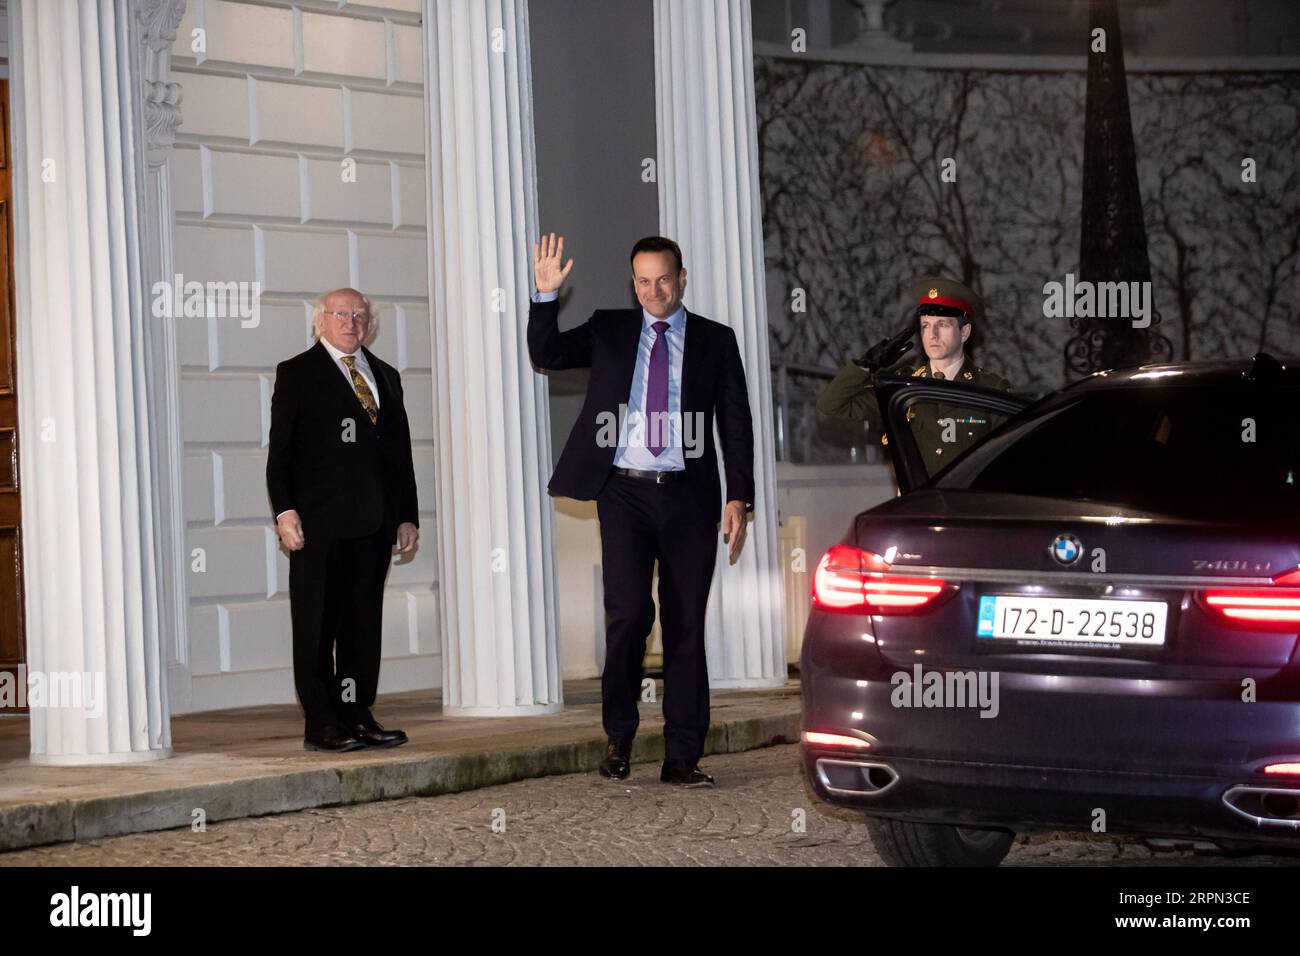 News Themen der Woche KW08 200221 -- DUBLIN, Feb. 21, 2020 -- Irish Prime Minister Leo Varadkar C leaves the official residence of the Irish president after tendering his resignation to Irish President Michael D. Higgins L in Dublin, Ireland, Feb. 20, 2020. The newly formed lower house of the Irish parliament failed to elect a new prime minister for the country during its first sitting held here on Thursday, reported Irish national radio and television broadcaster RTE. IRELAND-DUBLIN-IRISH PM-RESIGNATION LiuxYanyan PUBLICATIONxNOTxINxCHN Stock Photo